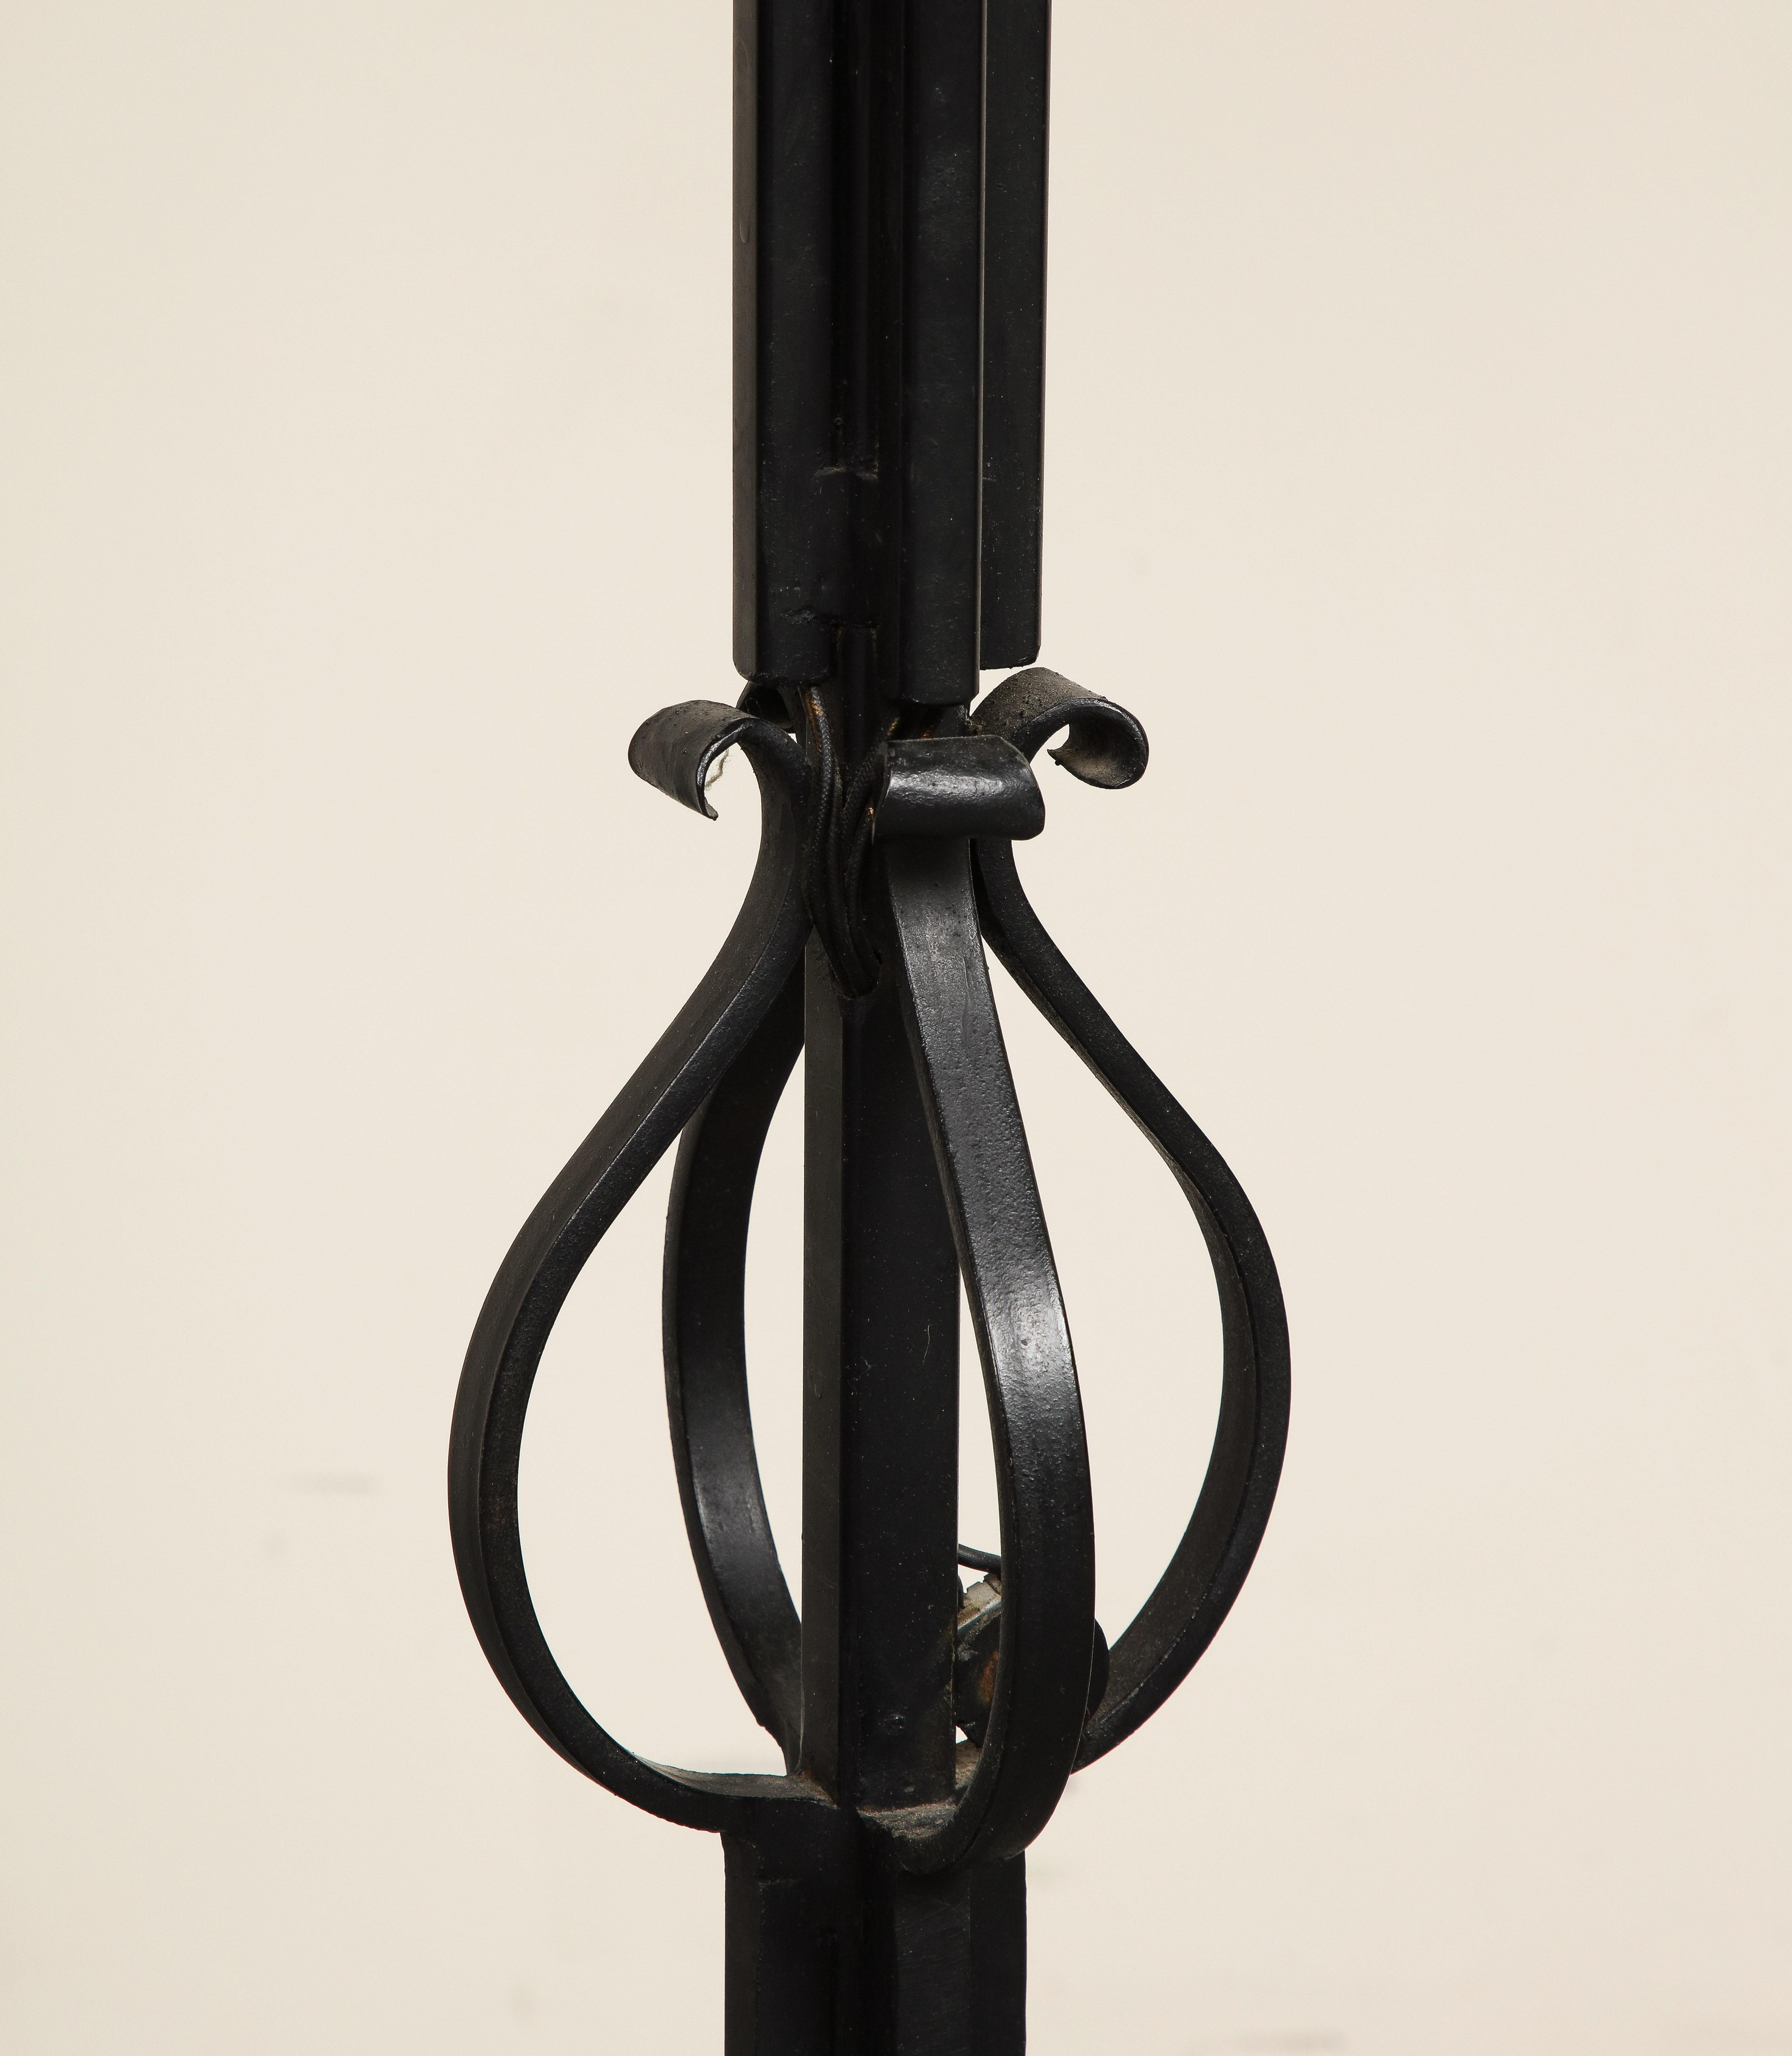 Midcentury Iron Candlestick Floor Lamp, attributed to Tommi Parzinger For Sale 7